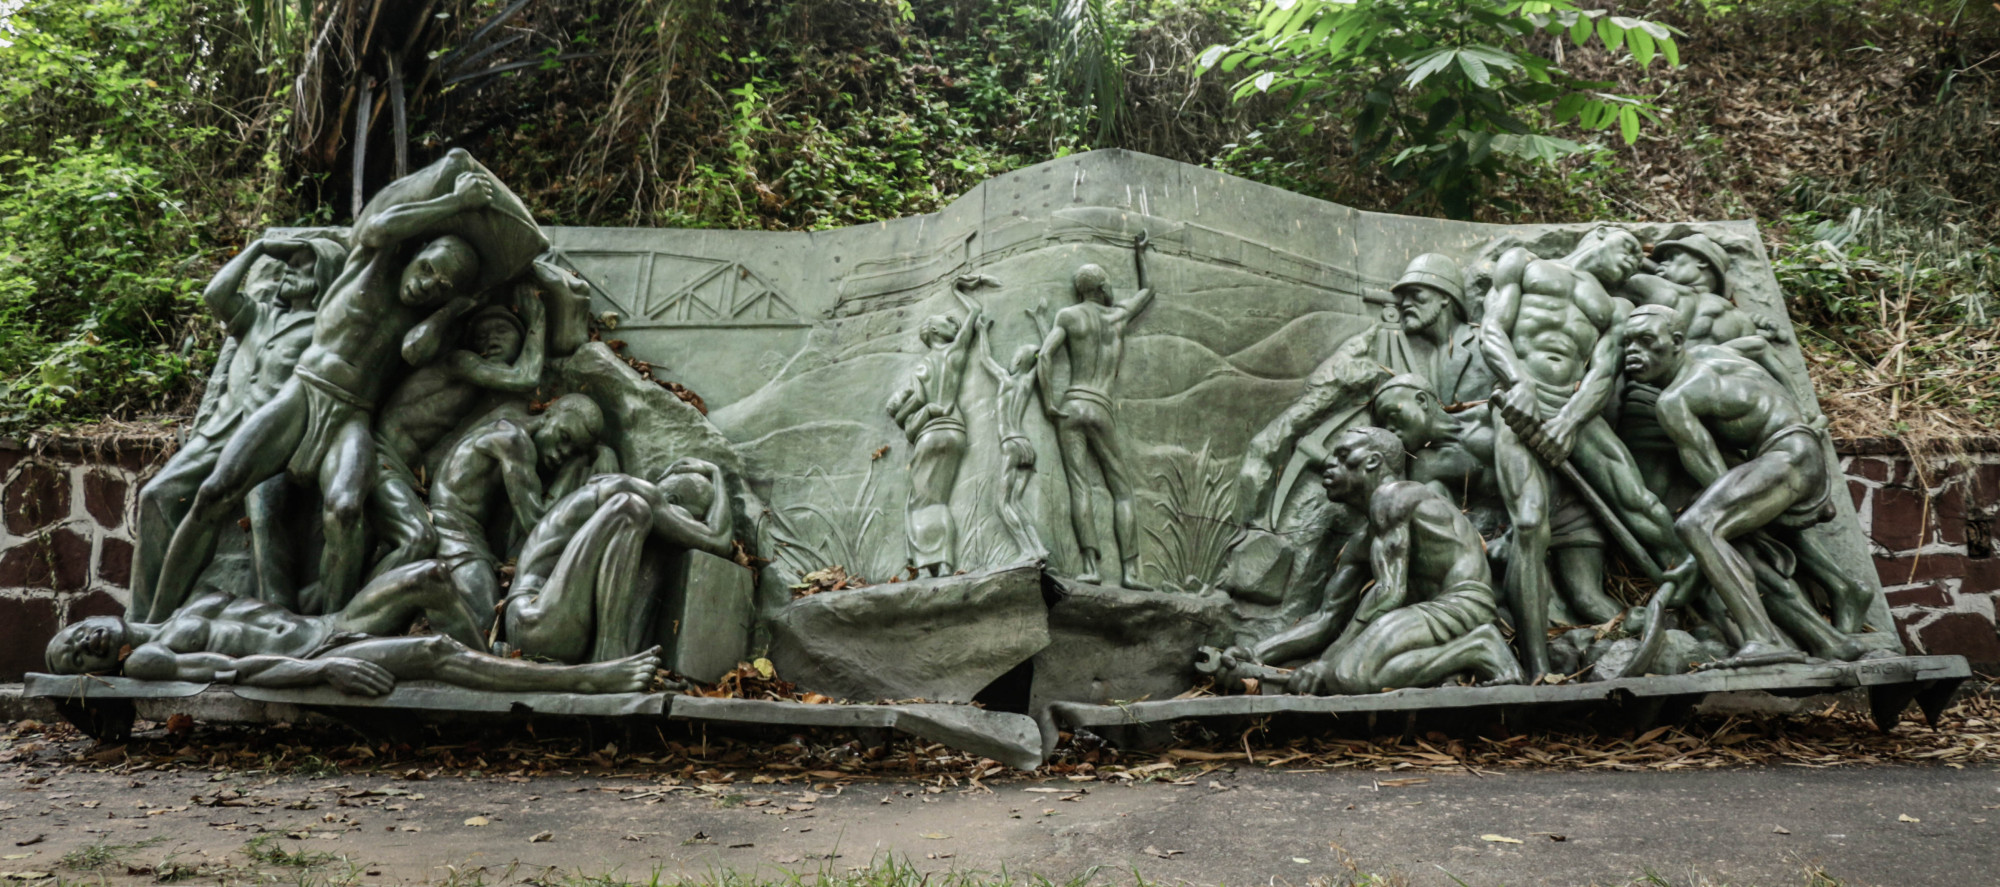 Le Monument du Rail, a bronze bas-relief by the Belgian sculptor Arthur Dupagne, sits at the Institute of National Museums of Congo, in the Mont Ngaliema area of the capital Kinshasa last week. The frieze was installed on the wall of city’s central station in 1948 to mark the 50-year anniversary of the completion of the Leopoldville-Matadi railway line, the construction of which cost the lives of nearly 2,000 people, most of them Congolese labourers. The sculpture was removed by the dictator Mobutu Sese Seko in 1971 and kept in his private garden, on Mount Ngaliema, where it remains today. Photos © Justin Makangara for Fondation Carmignac Kinshasa, Democratic Republic of Congo, June 2020.